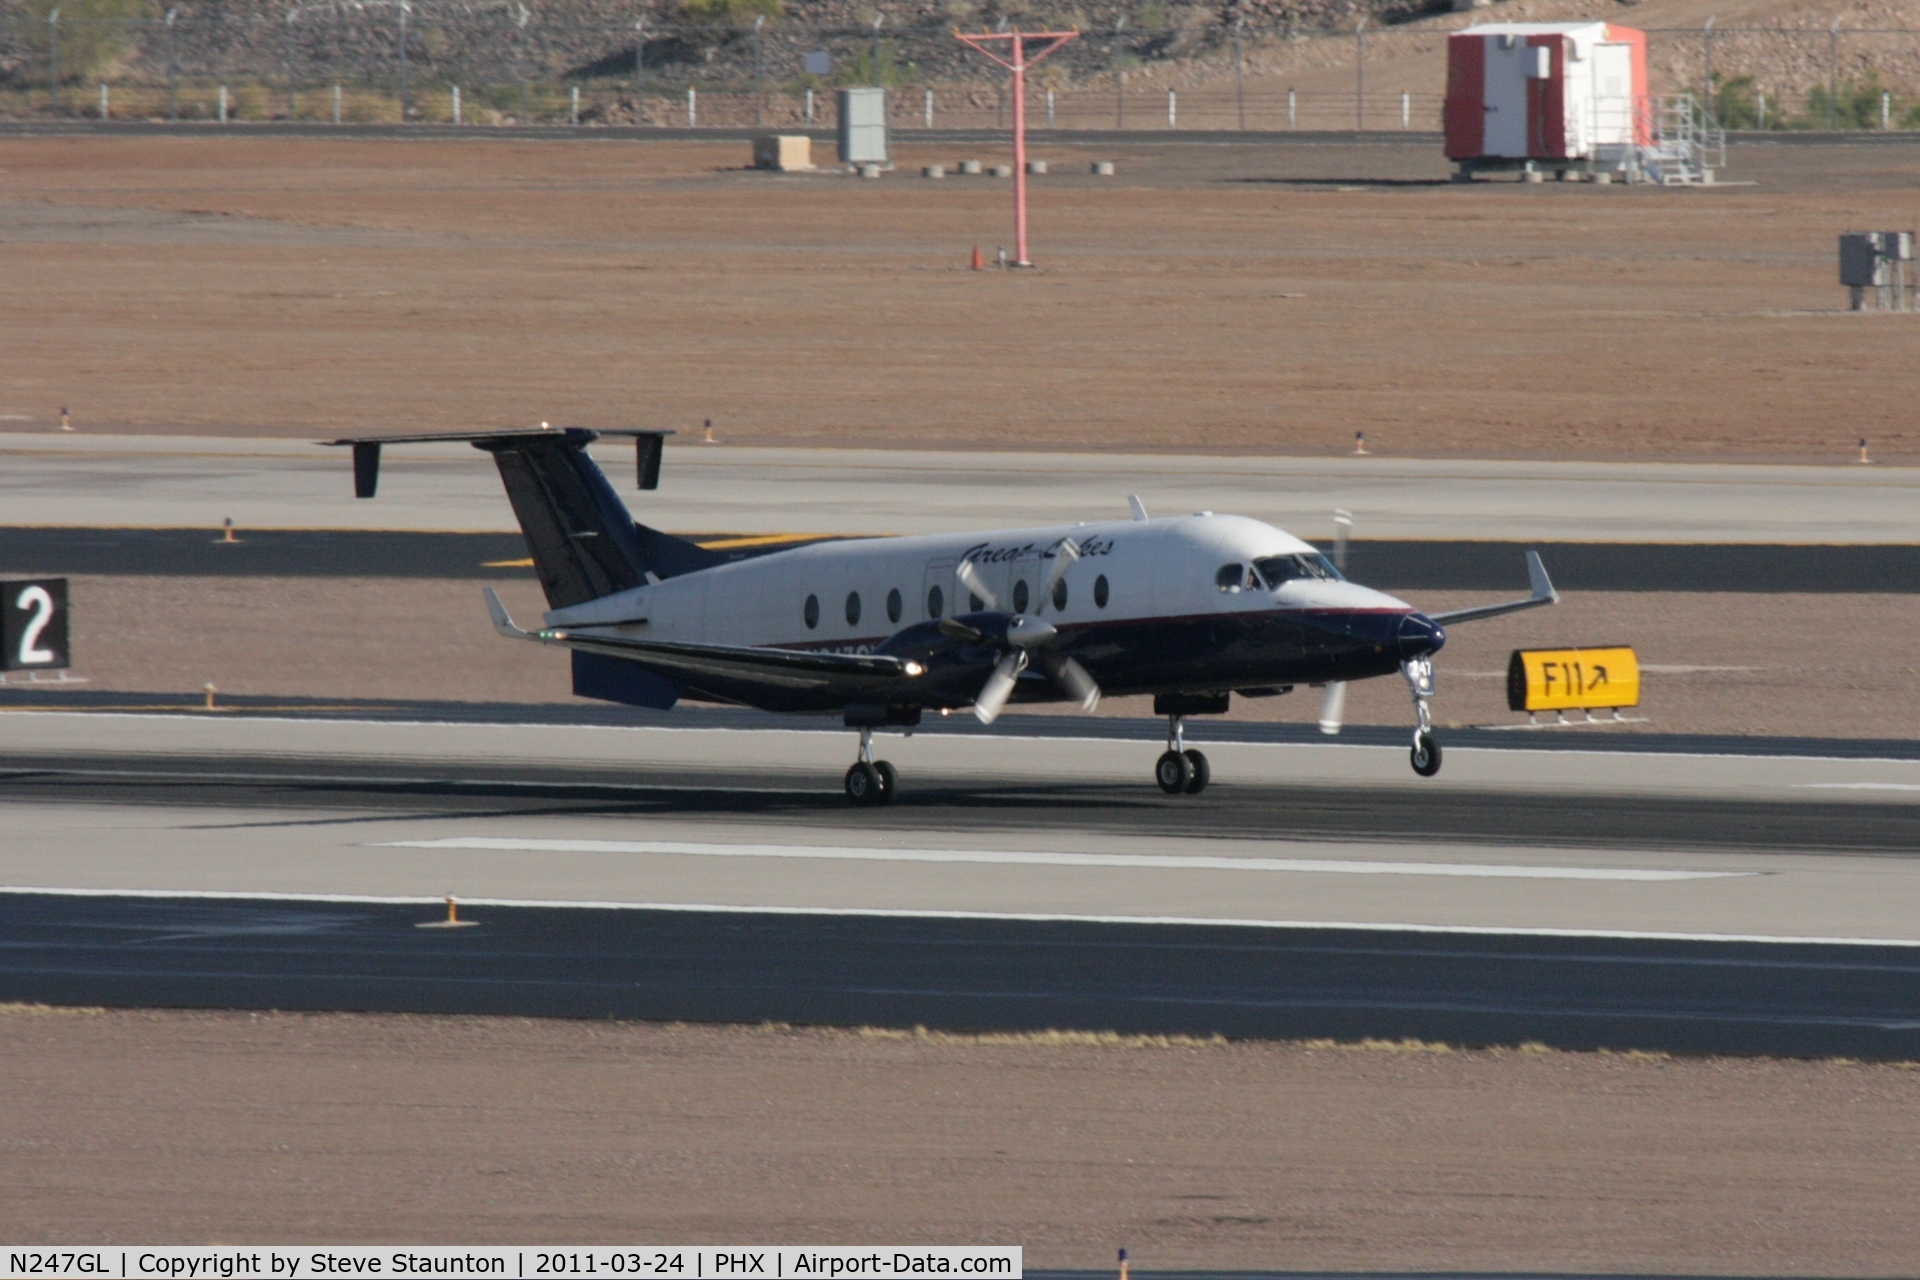 N247GL, 1996 Beech 1900D C/N UE-247, Taken at Phoenix Sky Harbor Airport, in March 2011 whilst on an Aeroprint Aviation tour